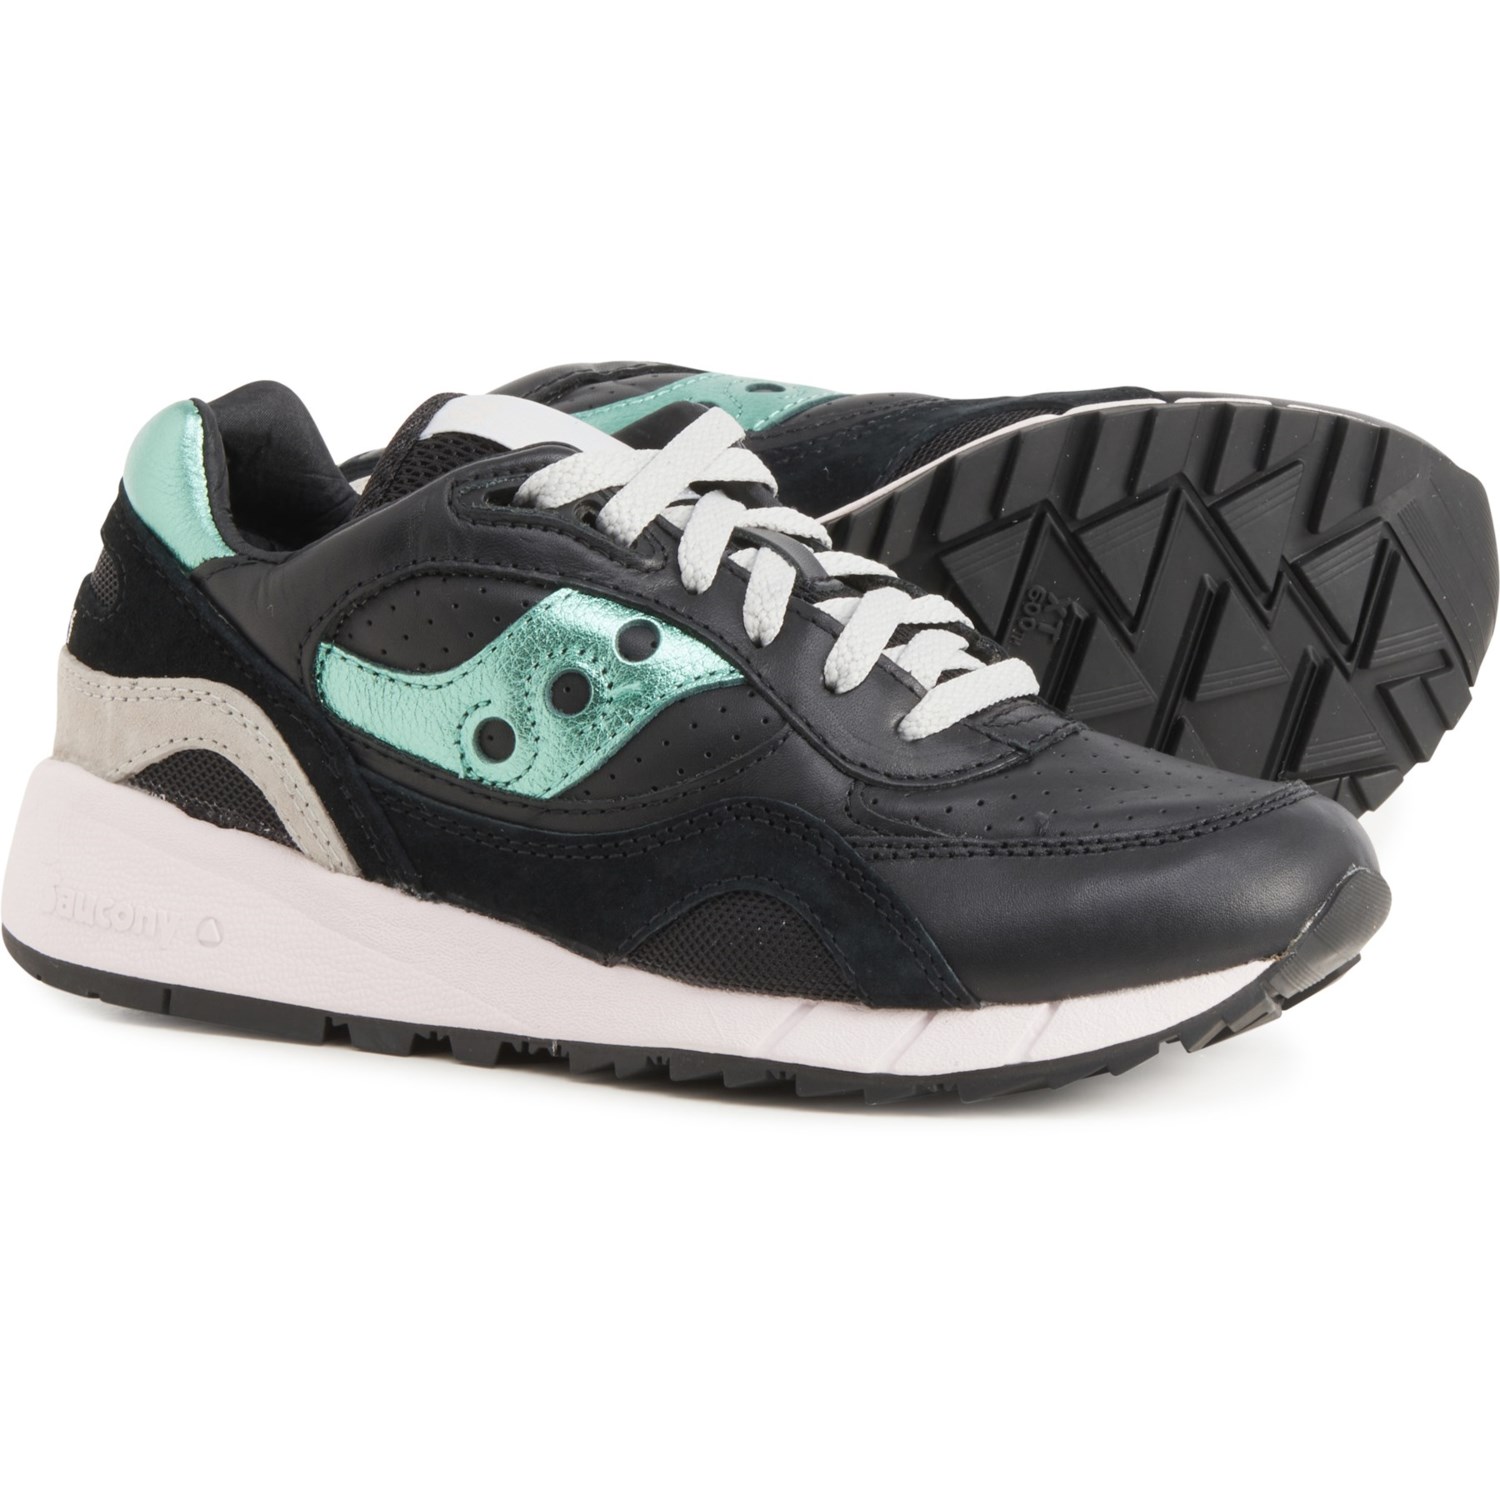 Saucony Fashion Running Shoes (For Women) - Save 50%